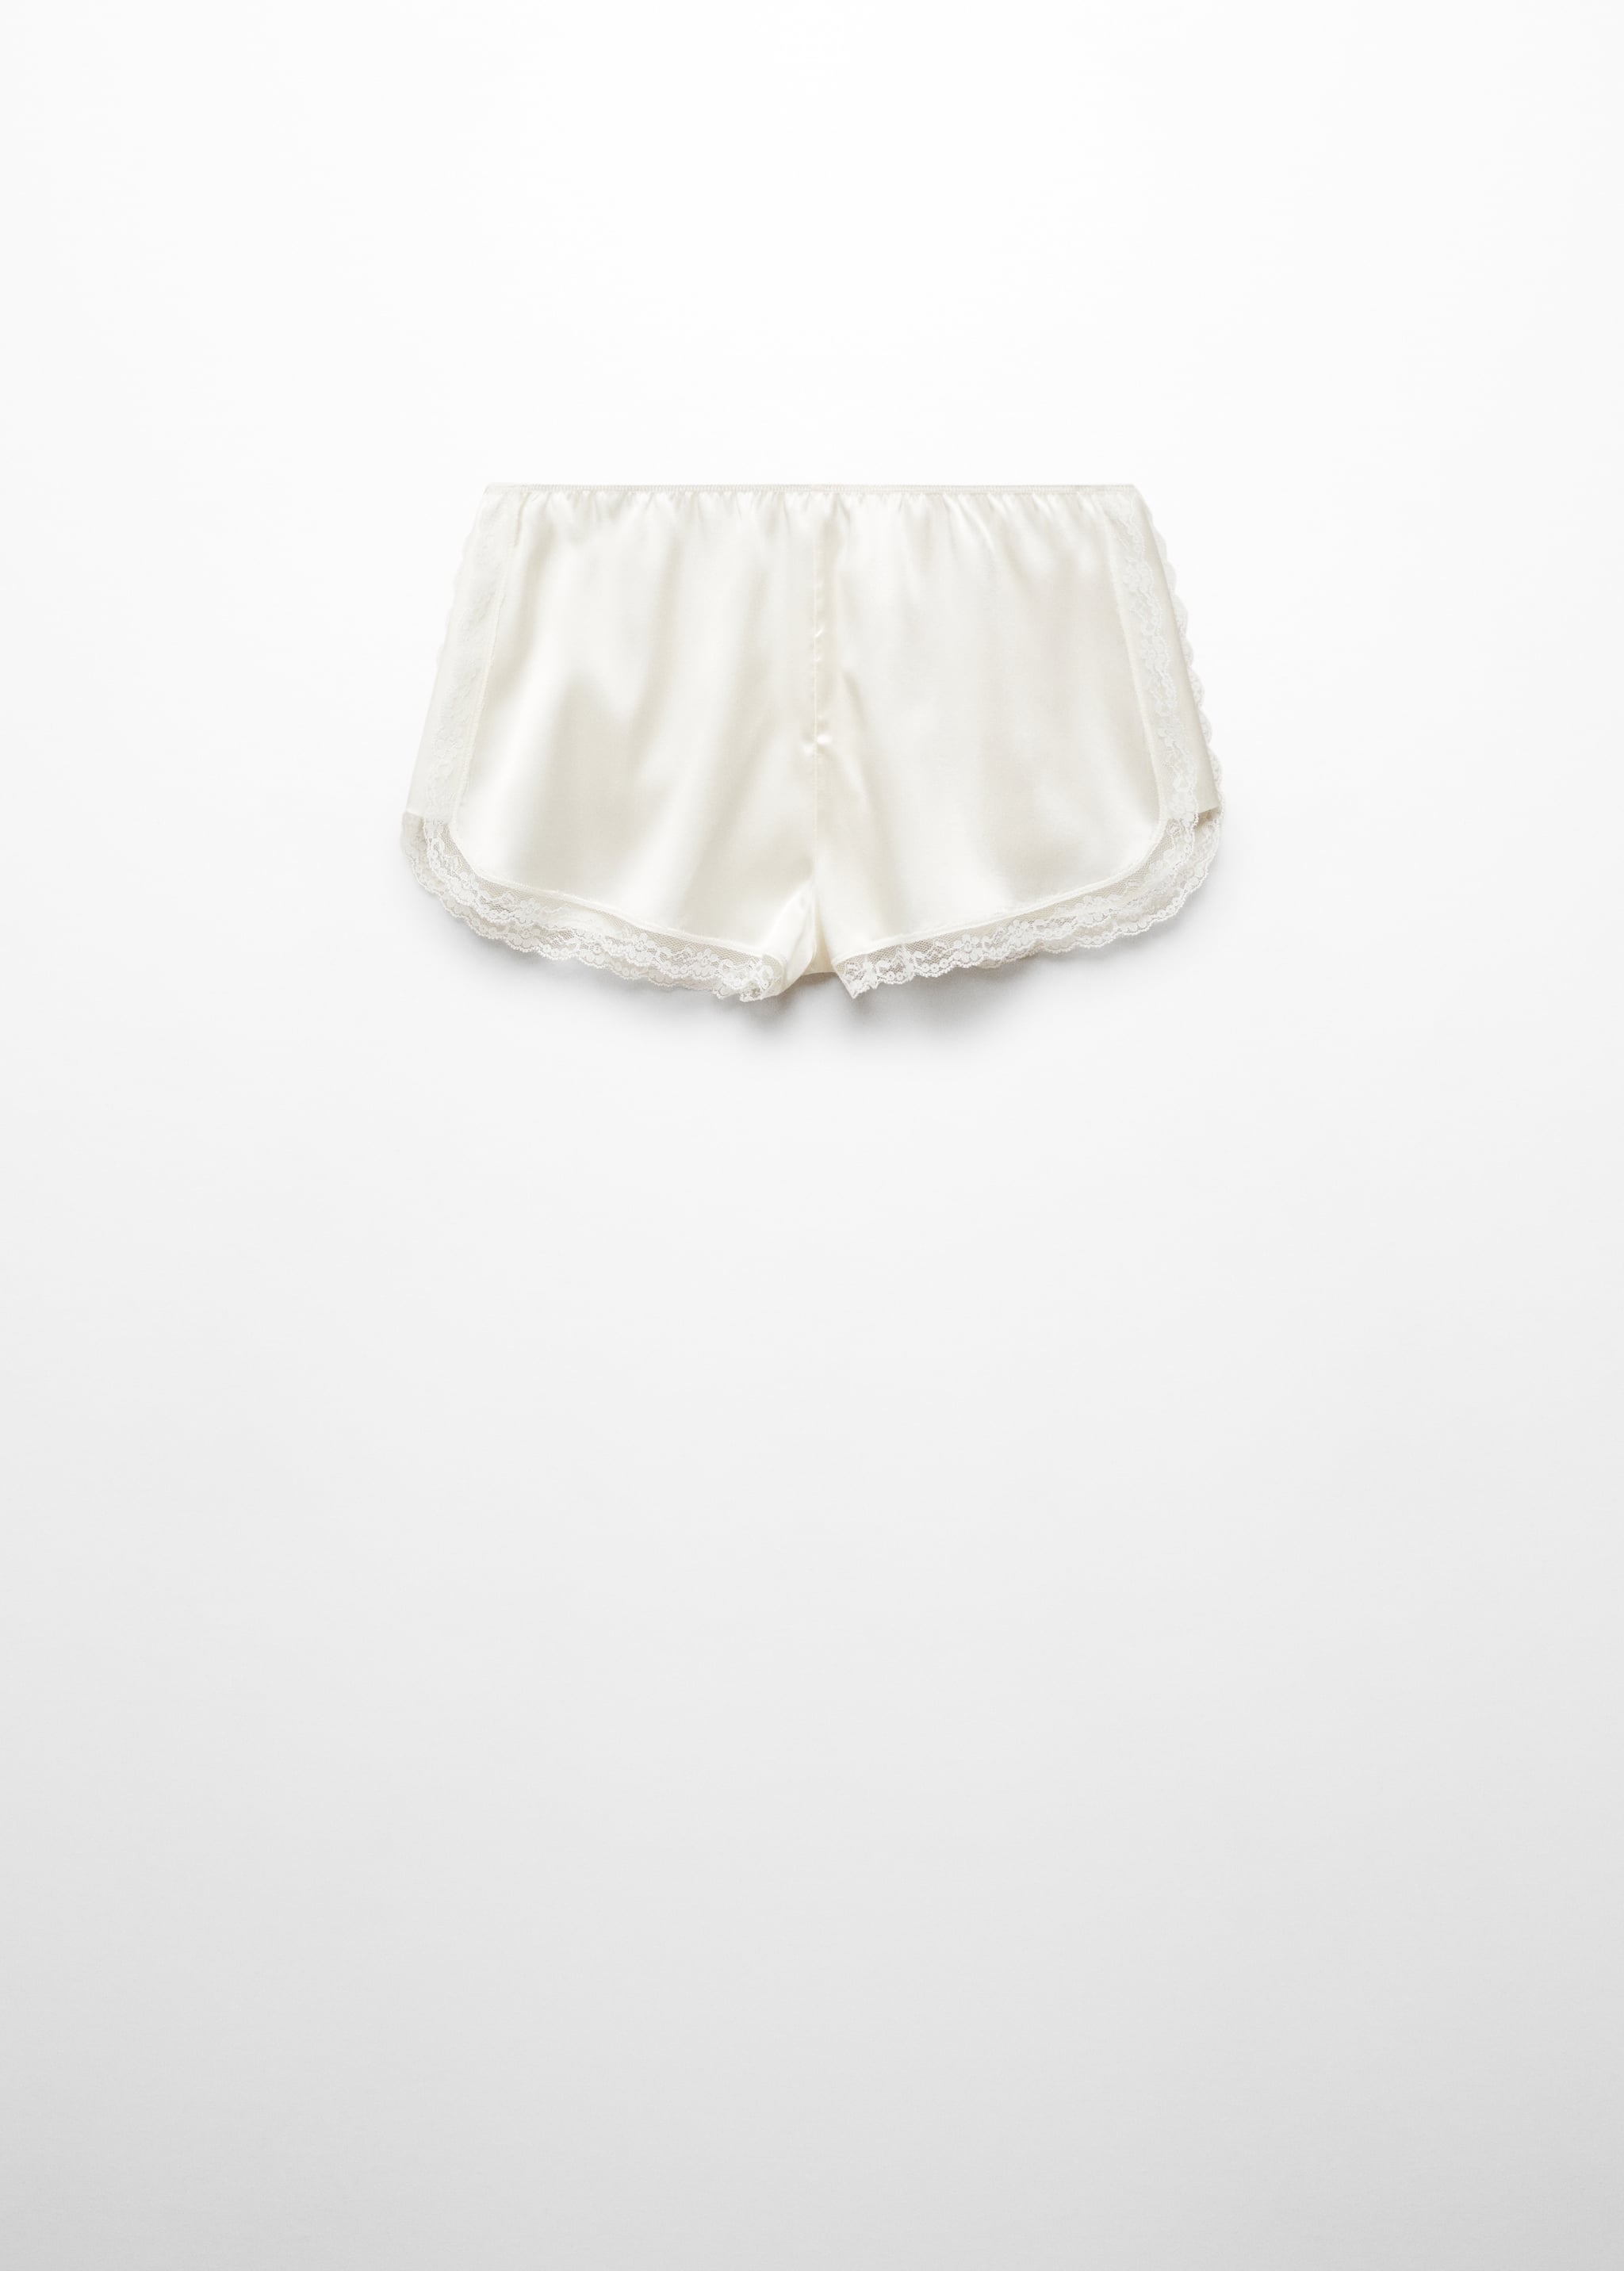 Silk lingerie shorts - Article without model